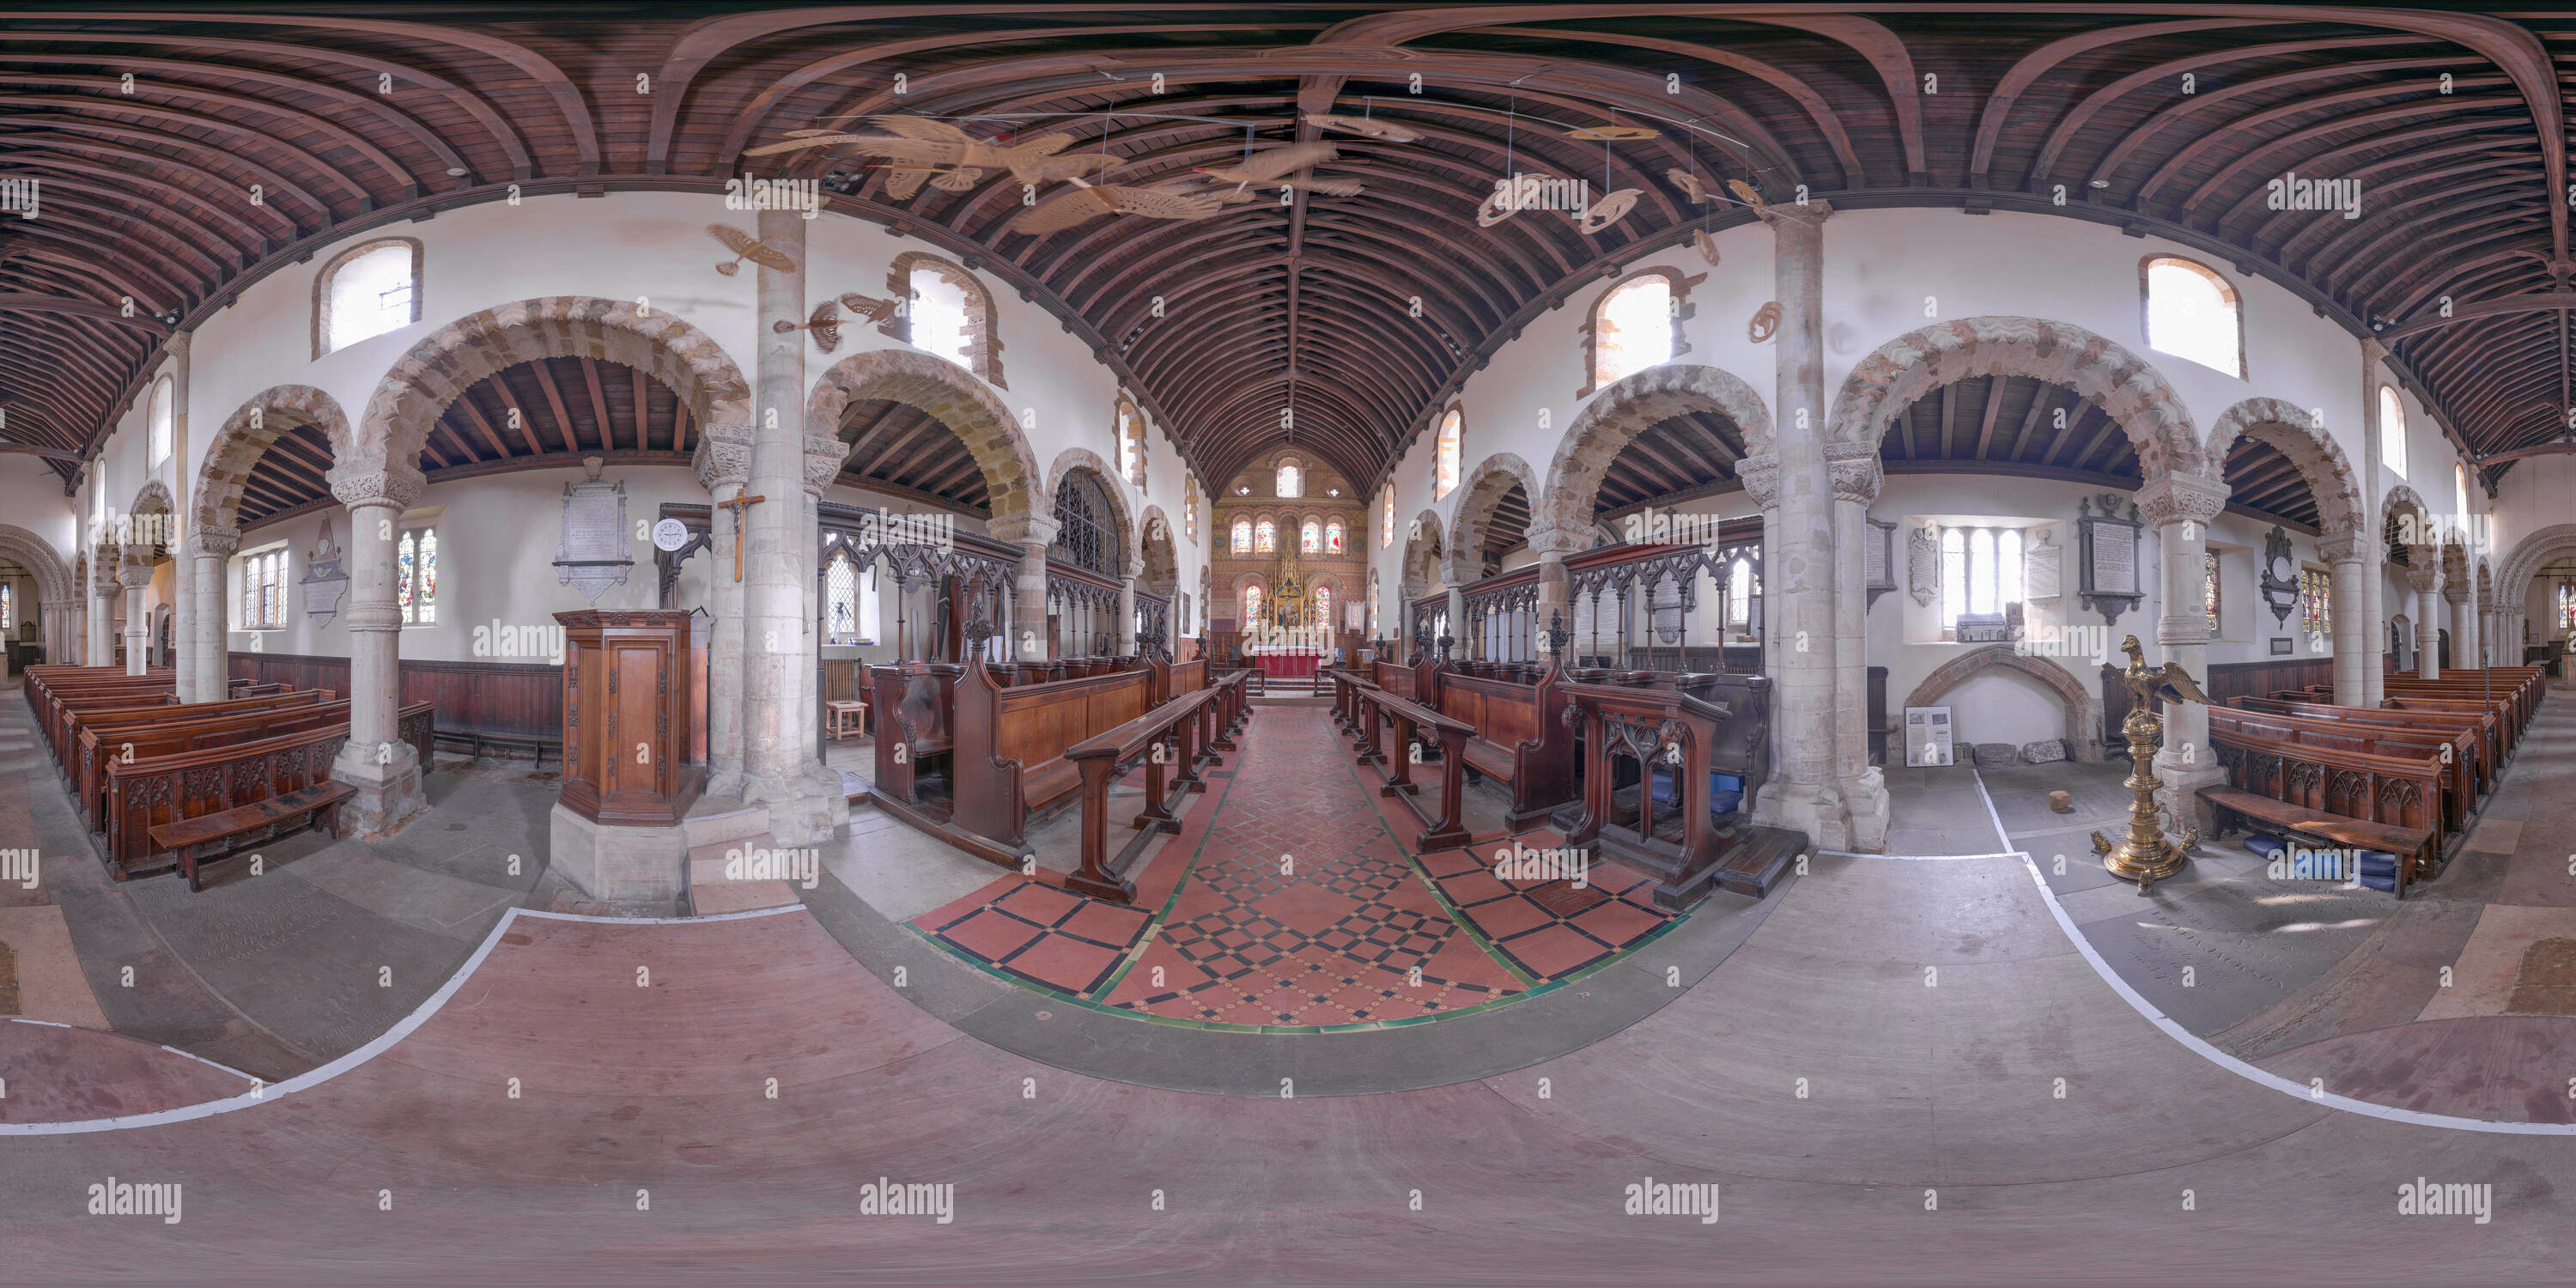 360 degree panoramic view of Interior of a norman built medieval church, twelfth century, now disused,  at Northampton, England.